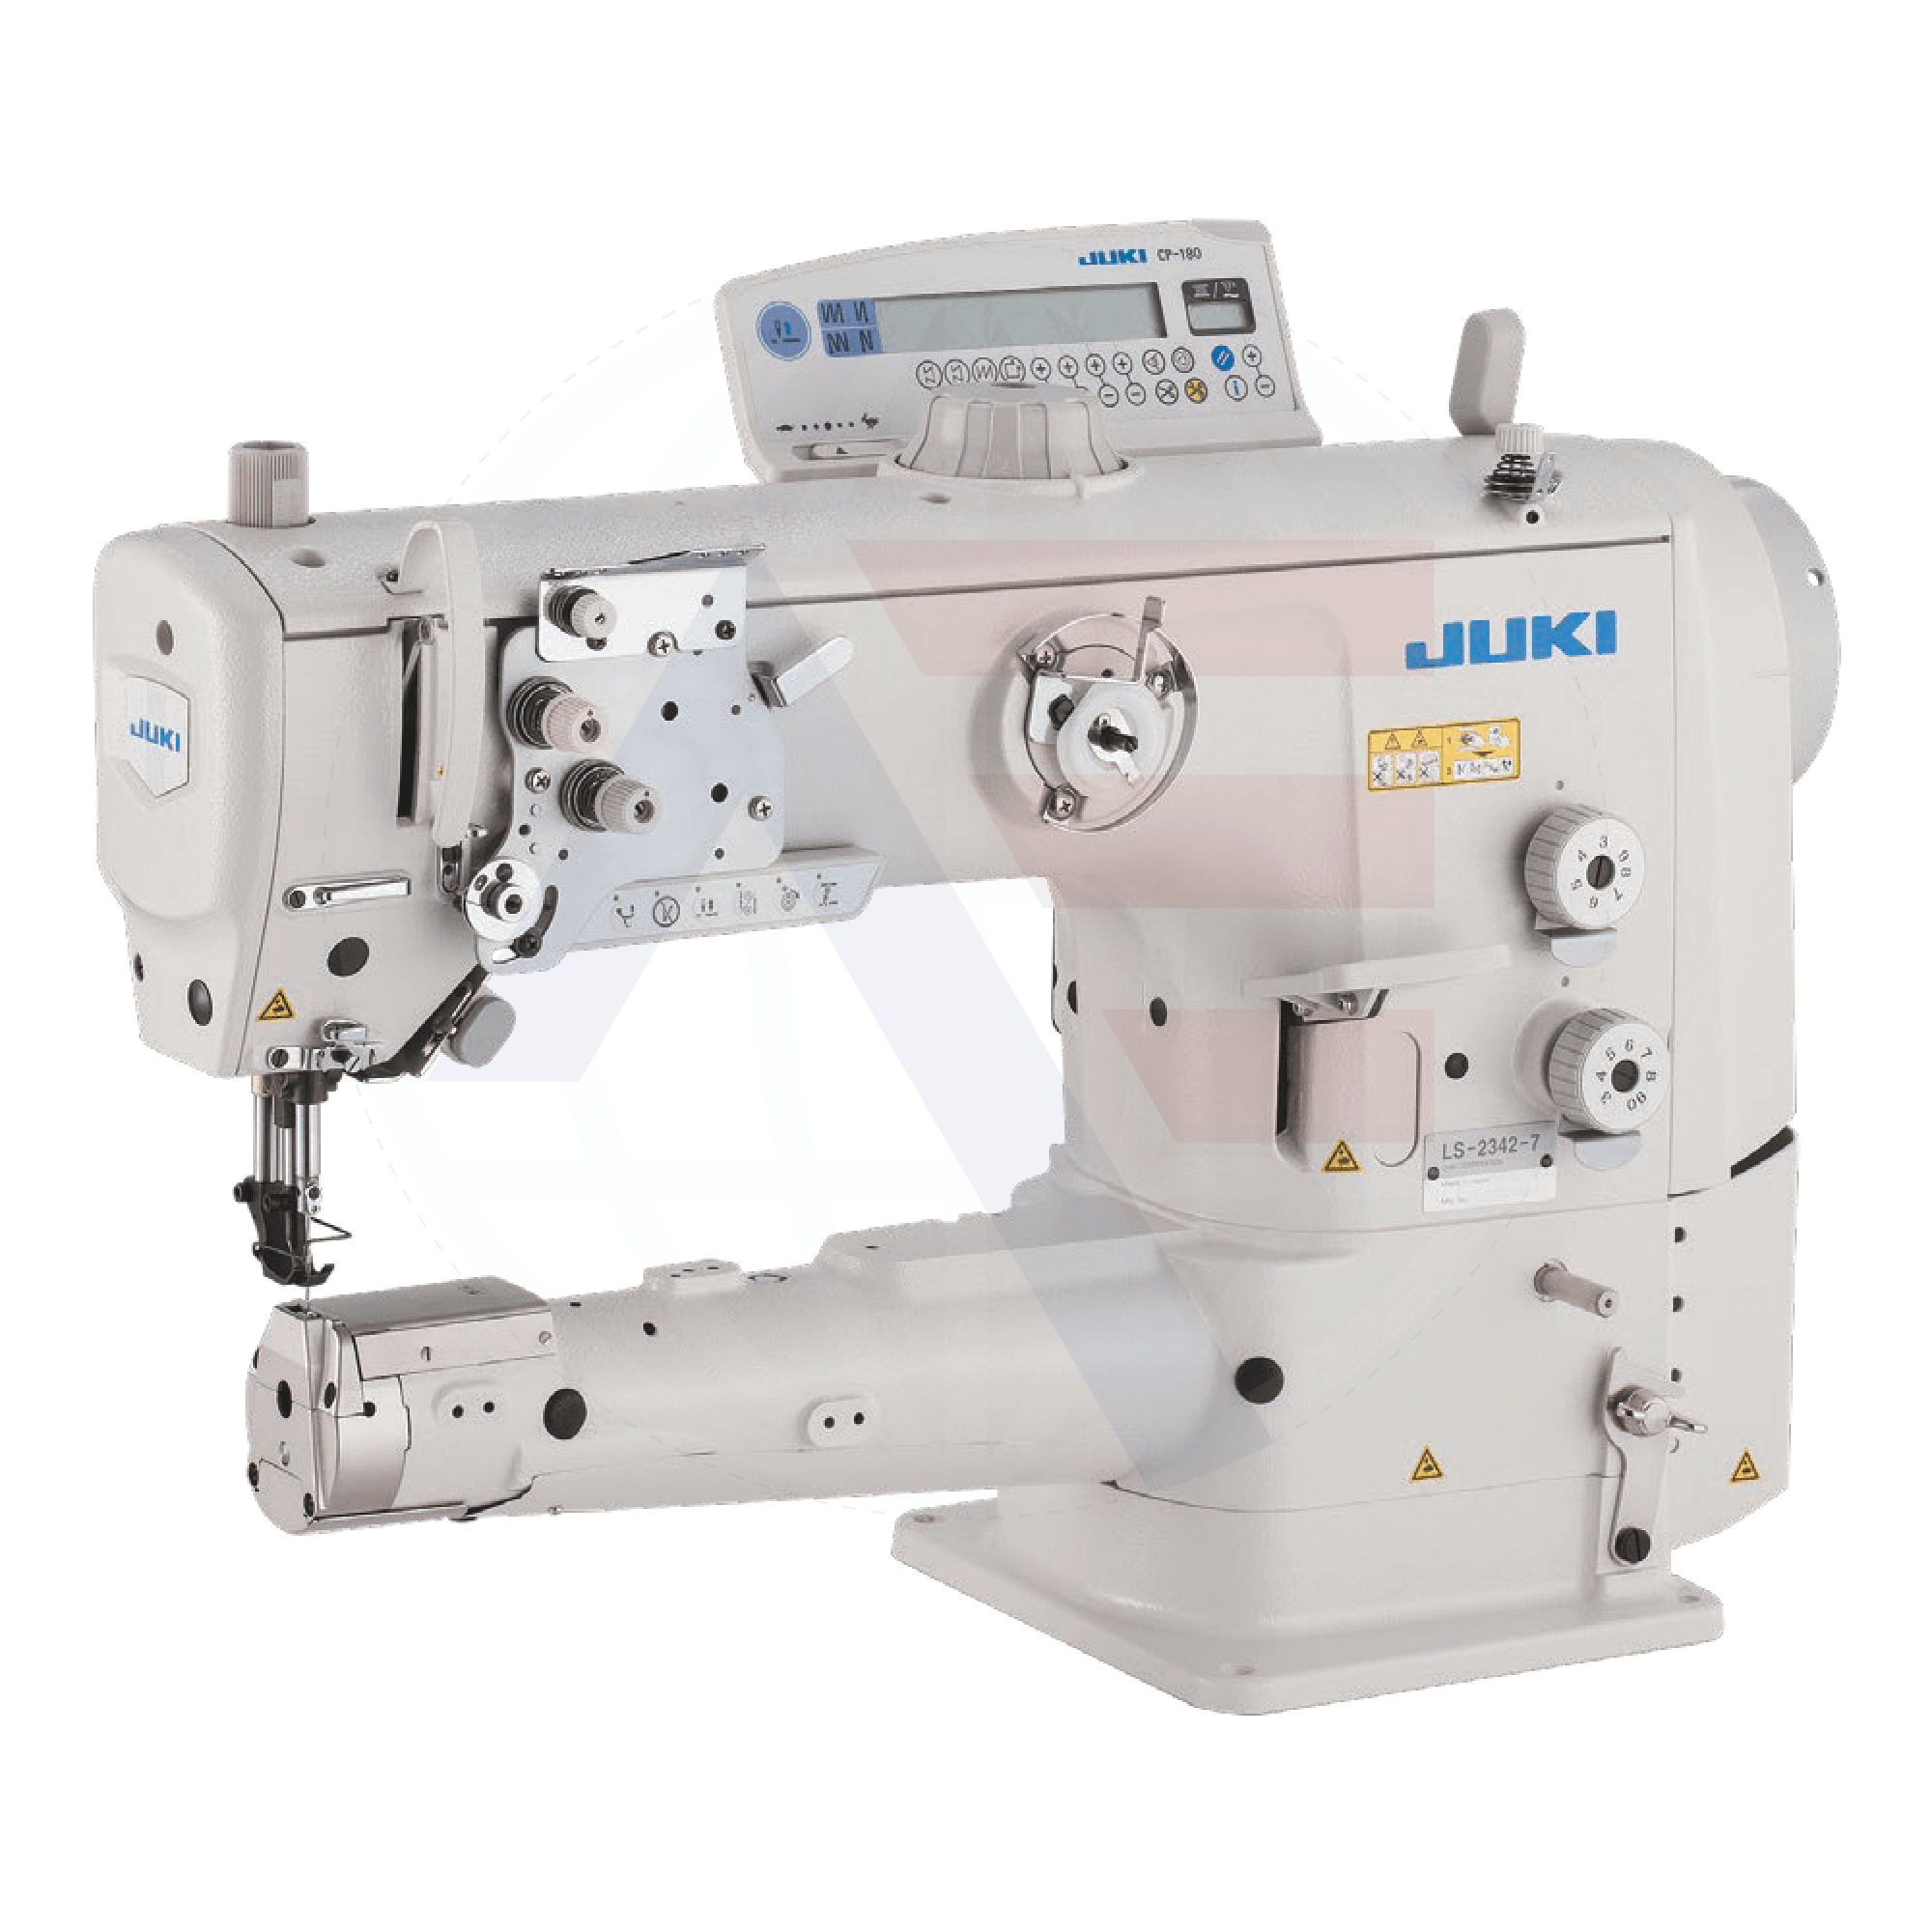 Juki Ls-2342-7 1-Needle Cylinder-Bed Walking-Foot Machine (Auto-Functions) Sewing Machines